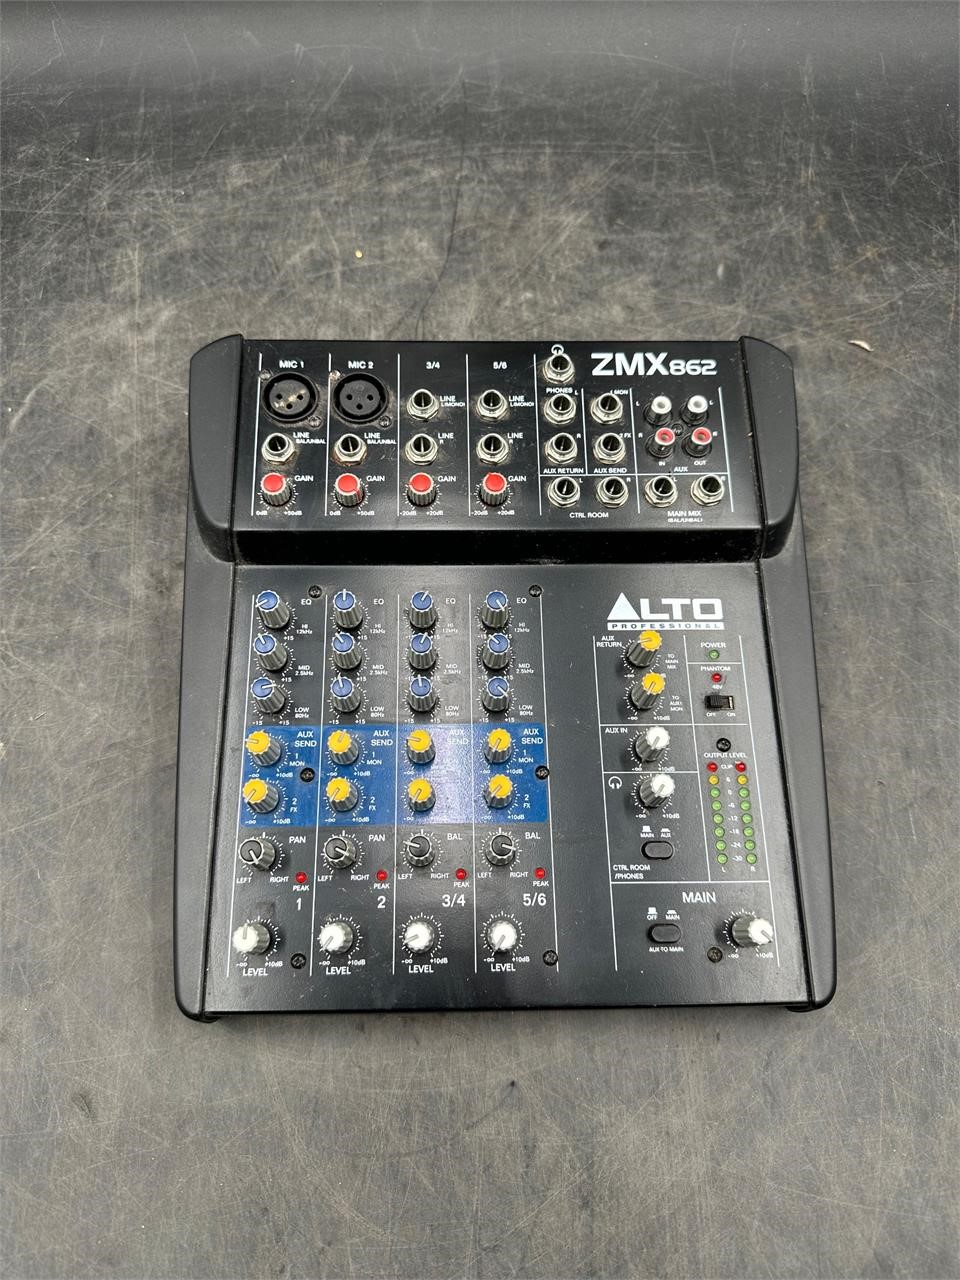 ZMX 862 Channel Mixer needs a power cord